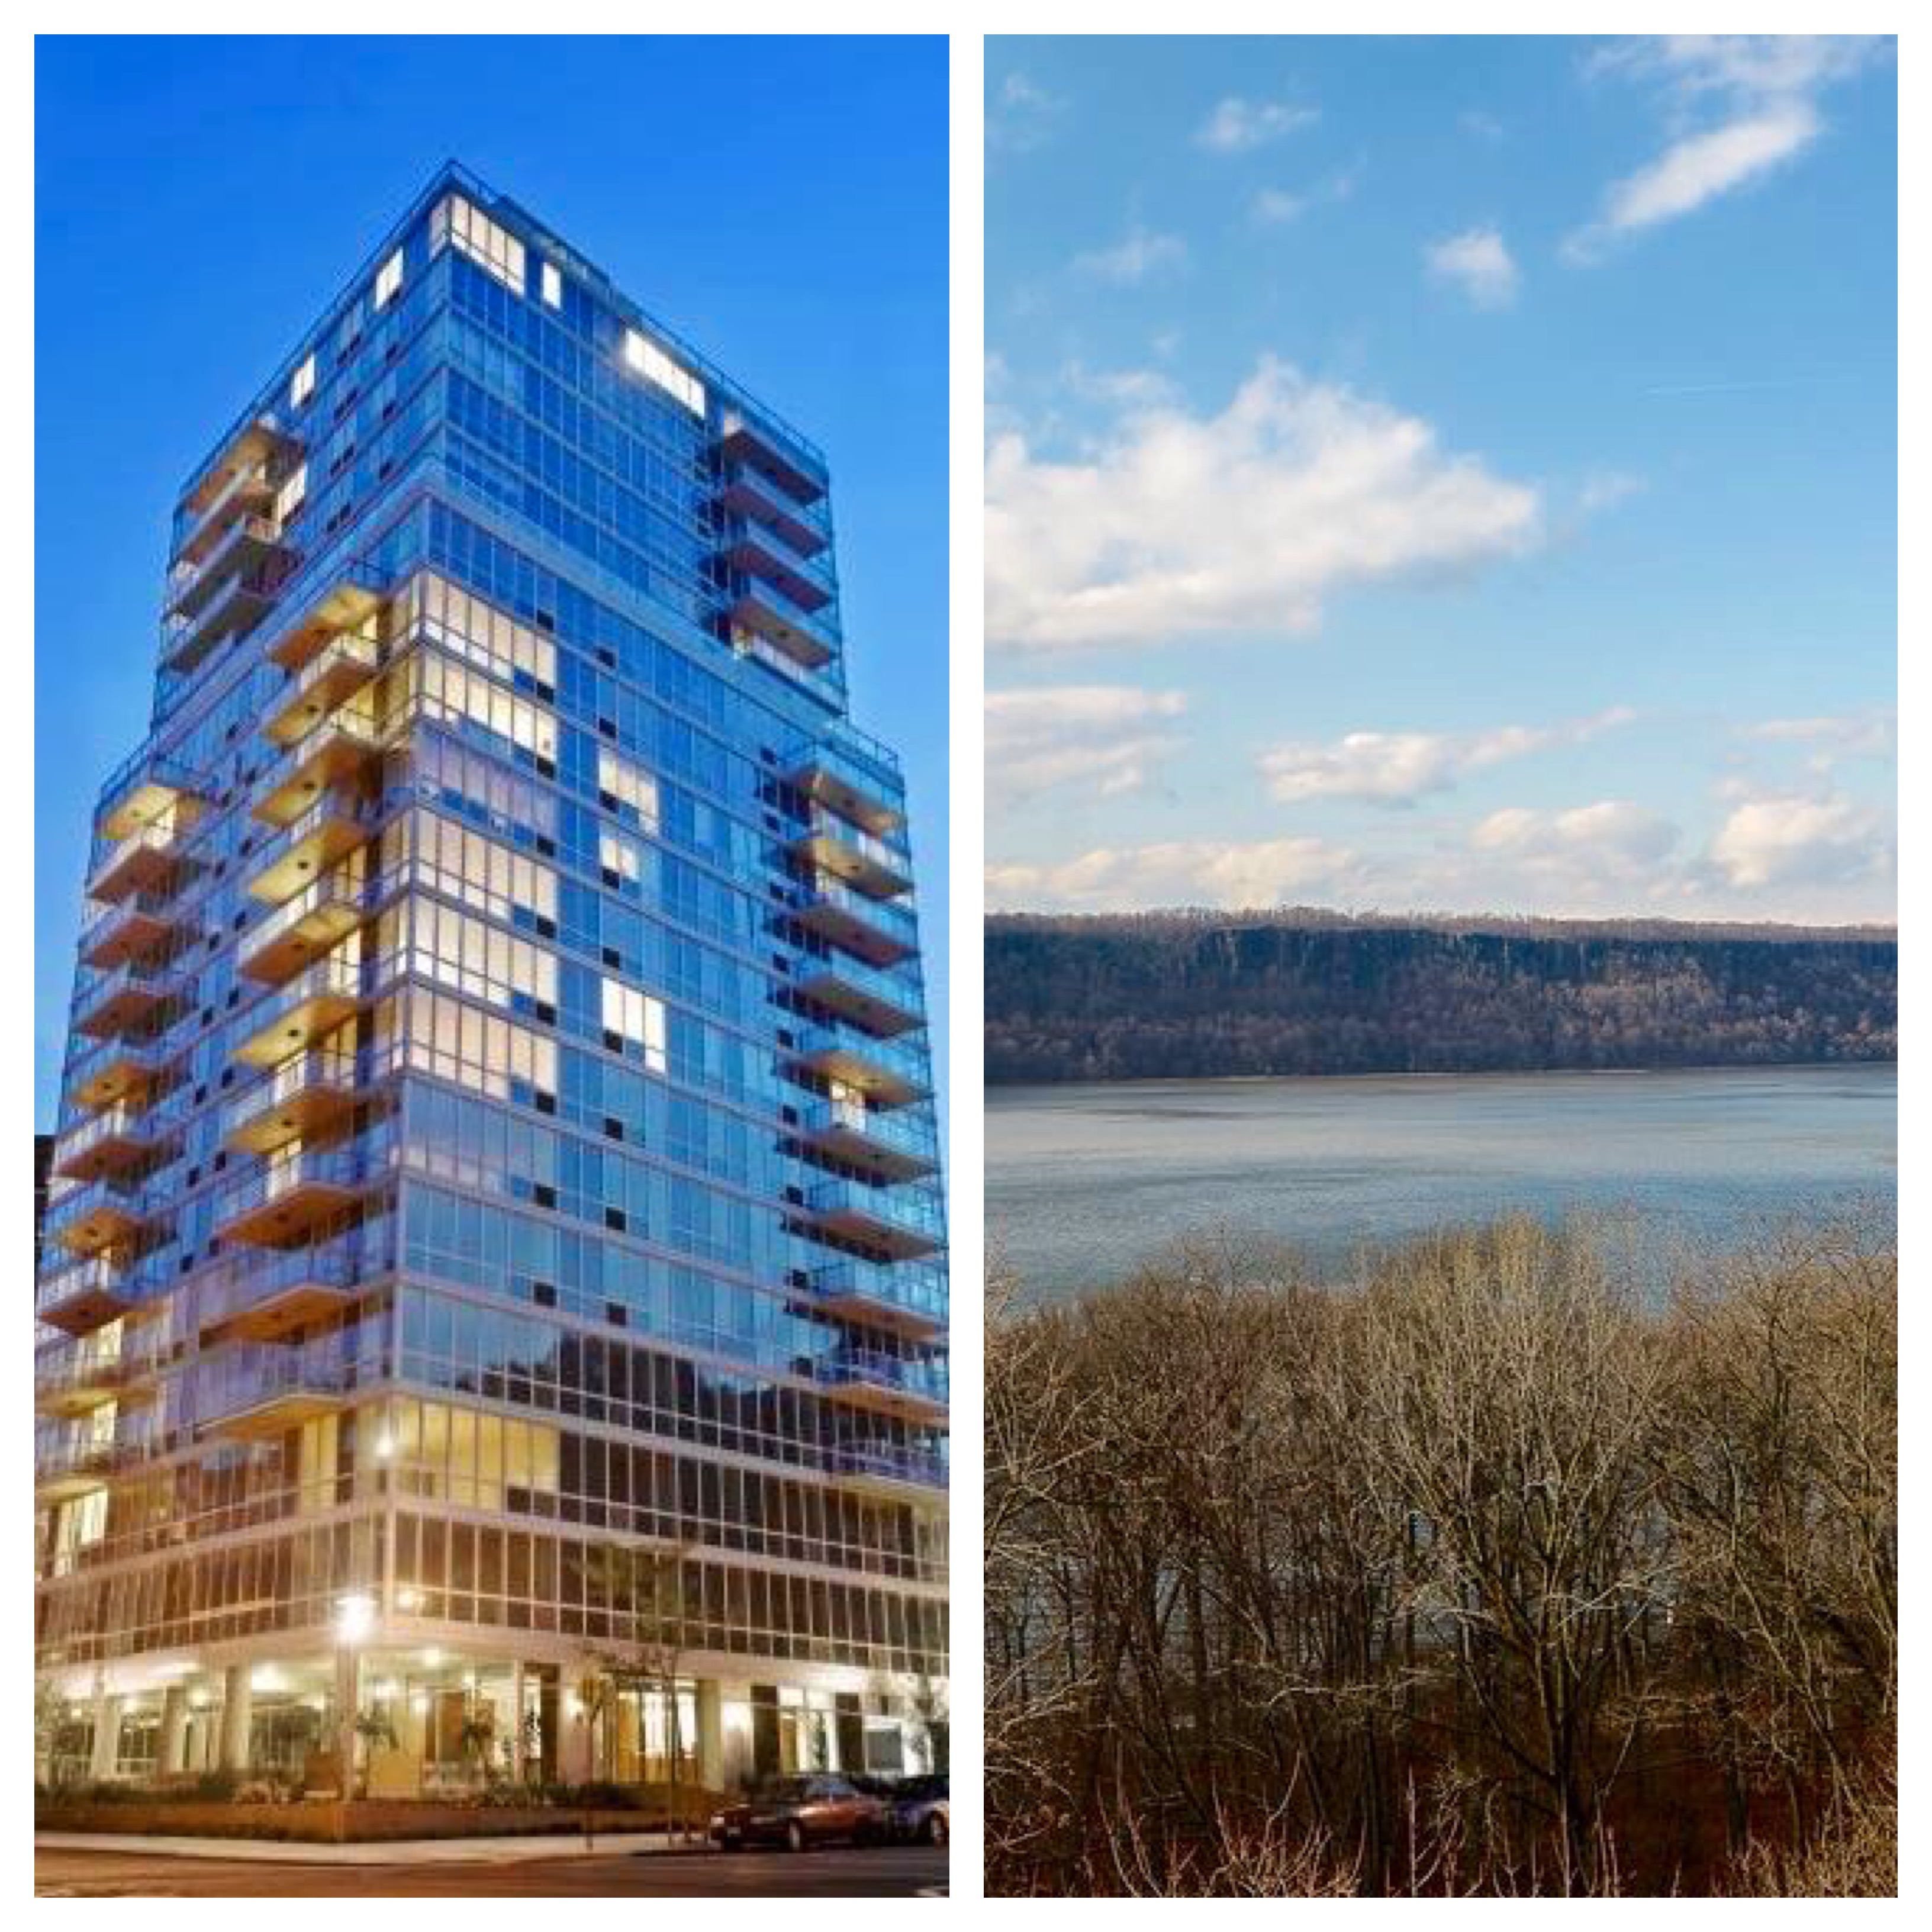 Full-service amenity condo buildings in Riverdale like the Solaria (right) offer luxury living, not to mention some of the best views of the Hudson, like those from the Hayden-on -Hudson complex (right). 